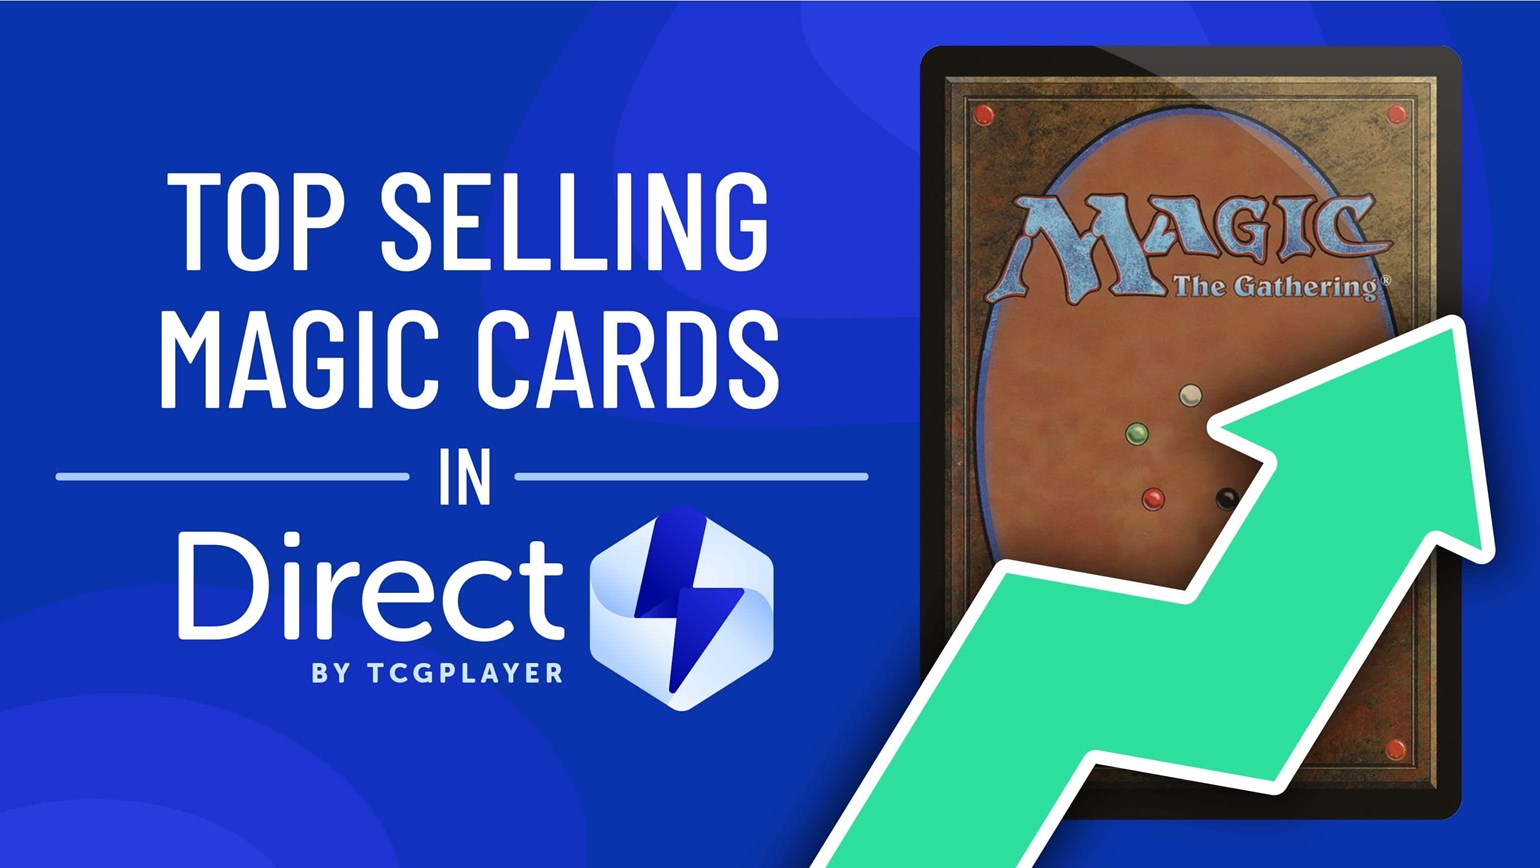 August Top Selling Magic: The Gathering Cards Under $25 in Direct by TCGplayer